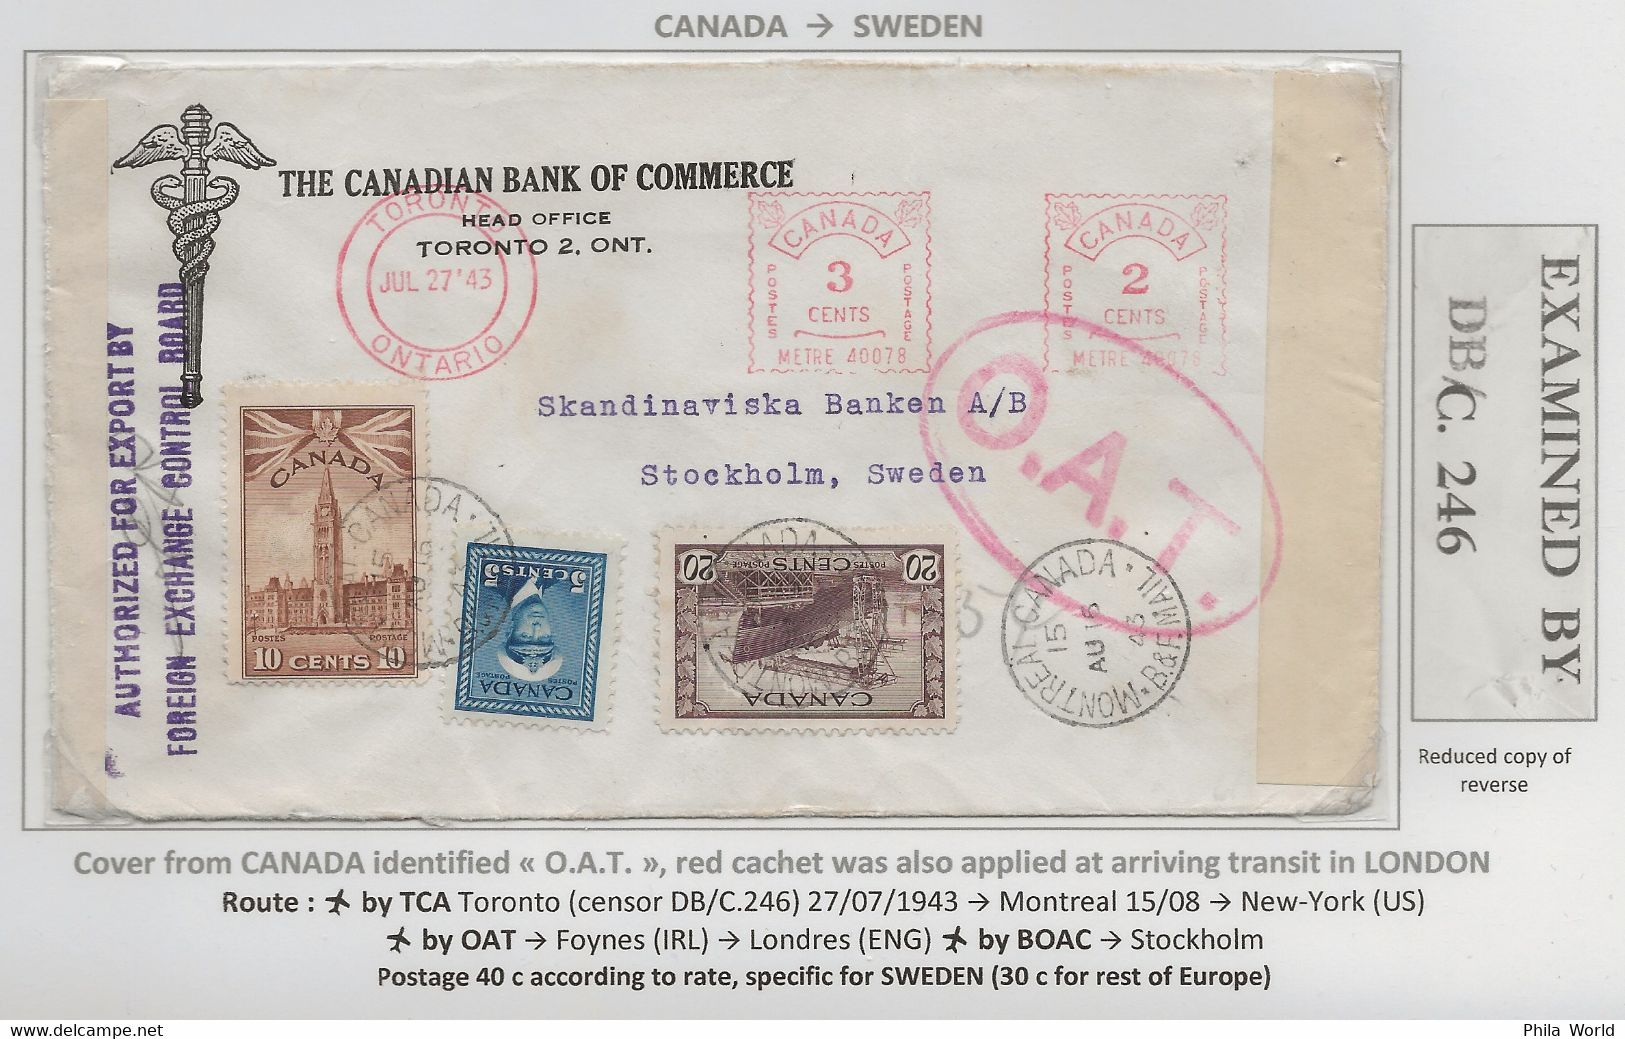 OAT 1943 CANADA Meter Postage EMA Air Mail Cover > SWEDEN US Censor EXAMINED DB/C 246 Censortape From TORONTO - Lettres & Documents